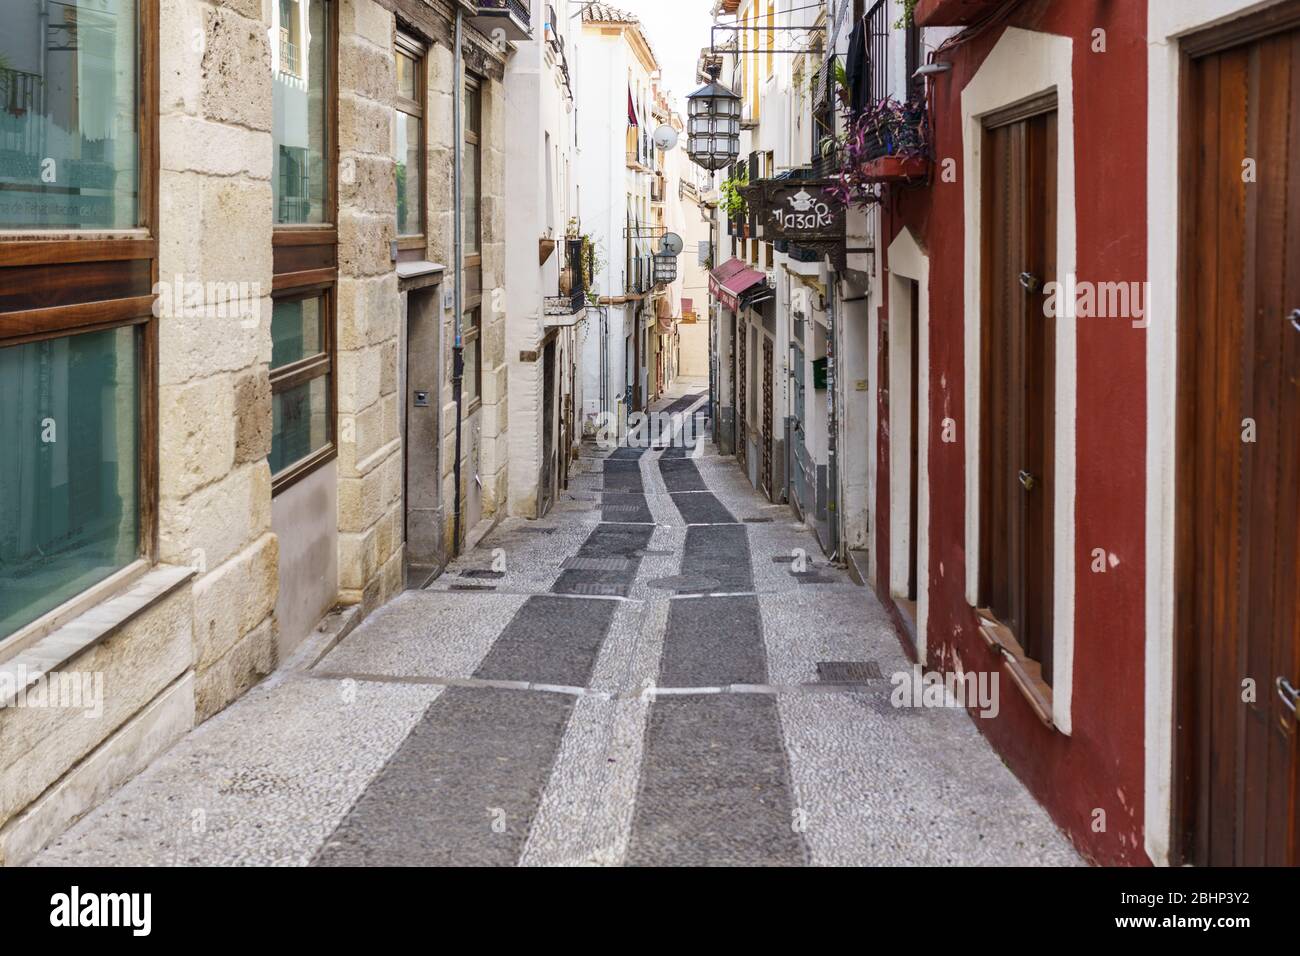 GRANADA, SPAIN, 23RD APRIL, 2020 View of the Caldereria street empty of people Stock Photo